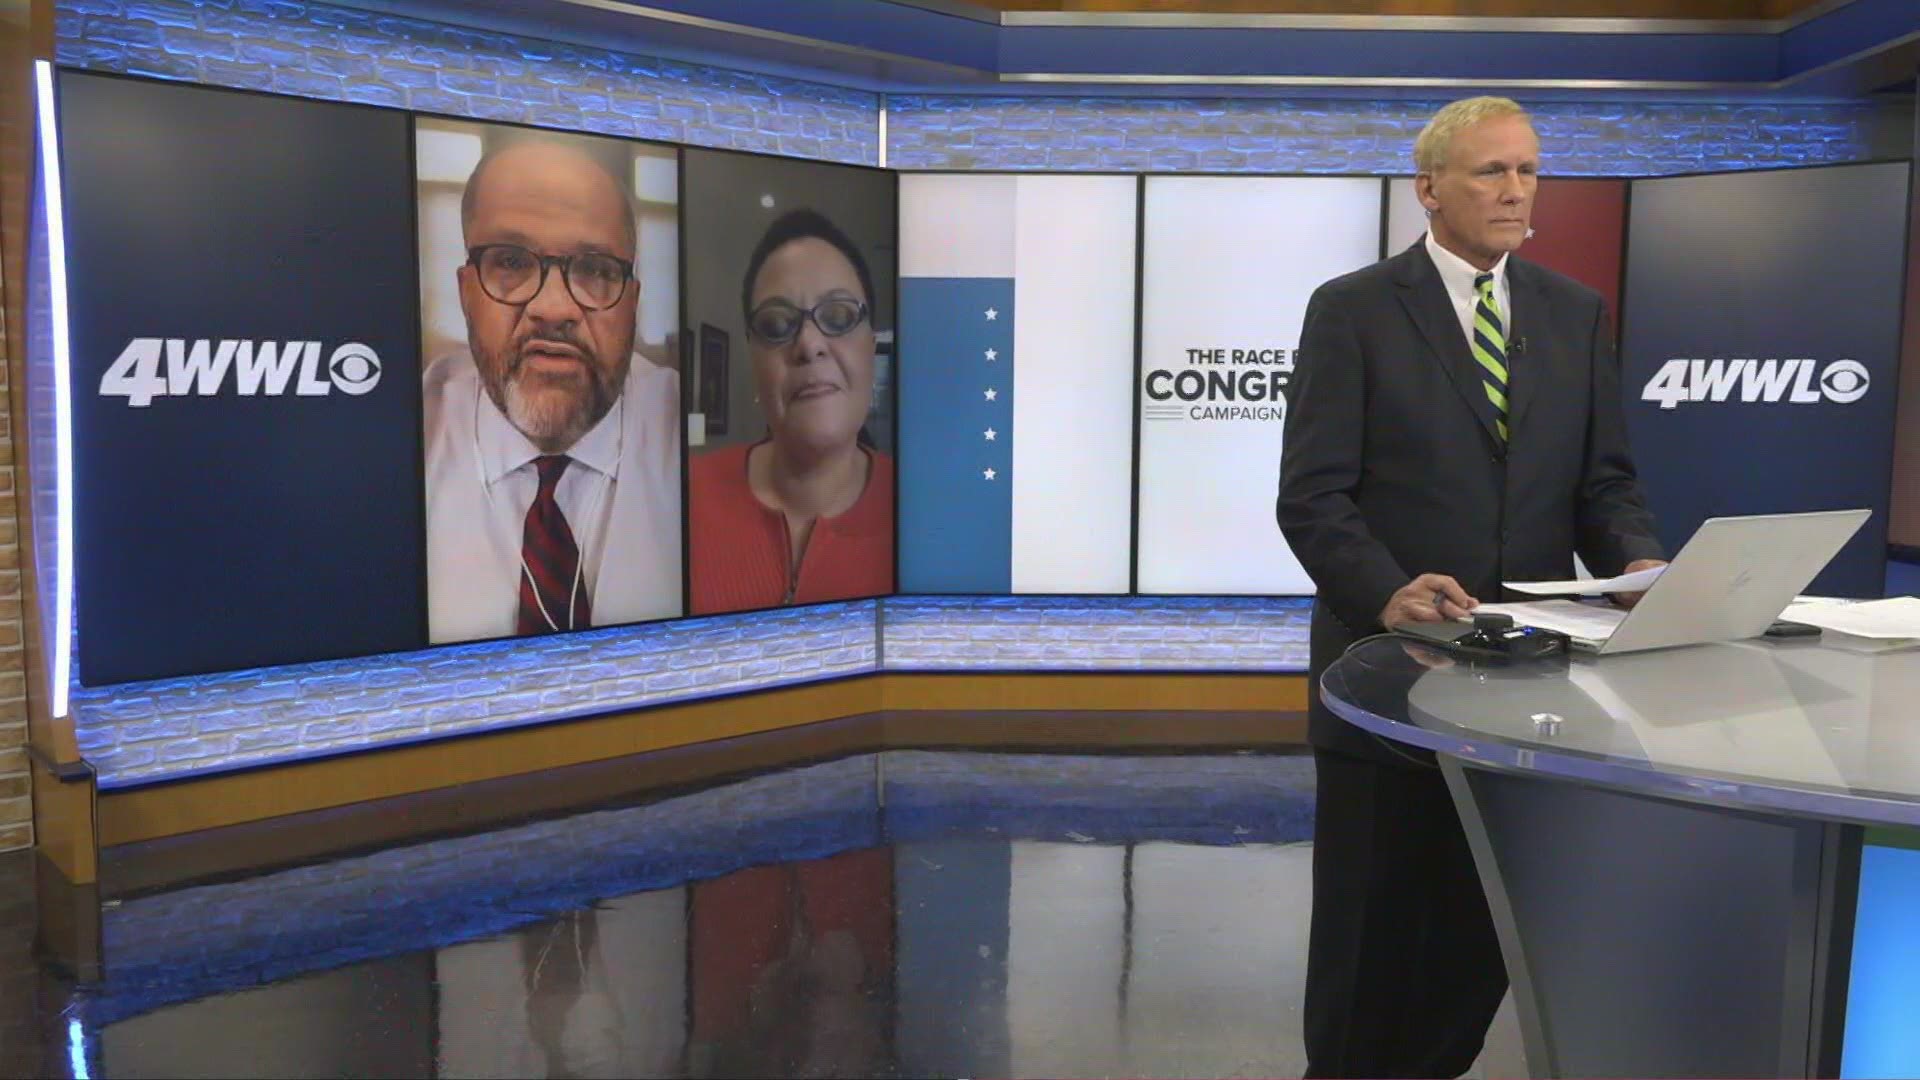 We take a further look at claims made on both candidates running for the Second Congressional district seat.